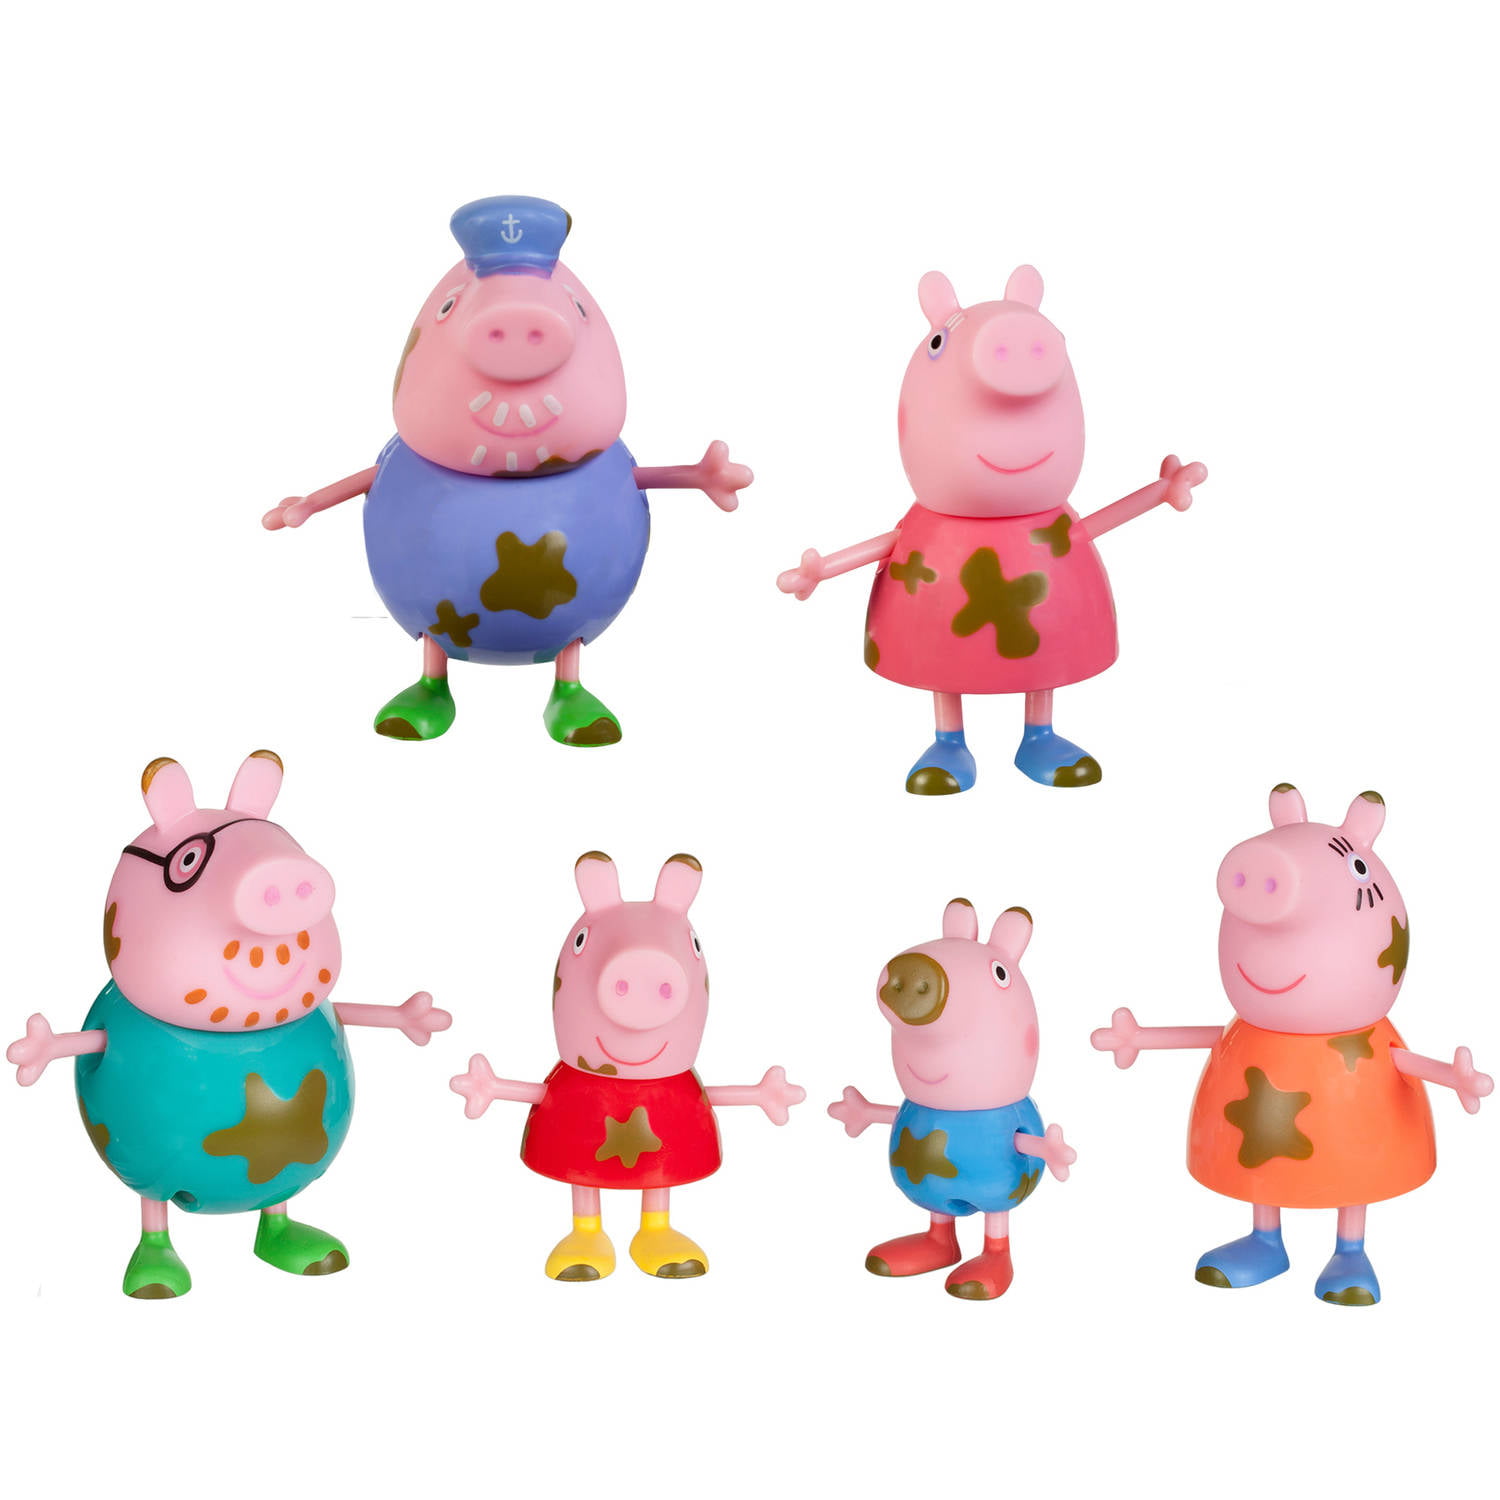 PEPPA PIG BIG WOODEN MUDDY PUDDLES PUZZLE EDUCATIONAL AND FUN QUALITY 18 MTHS+ 